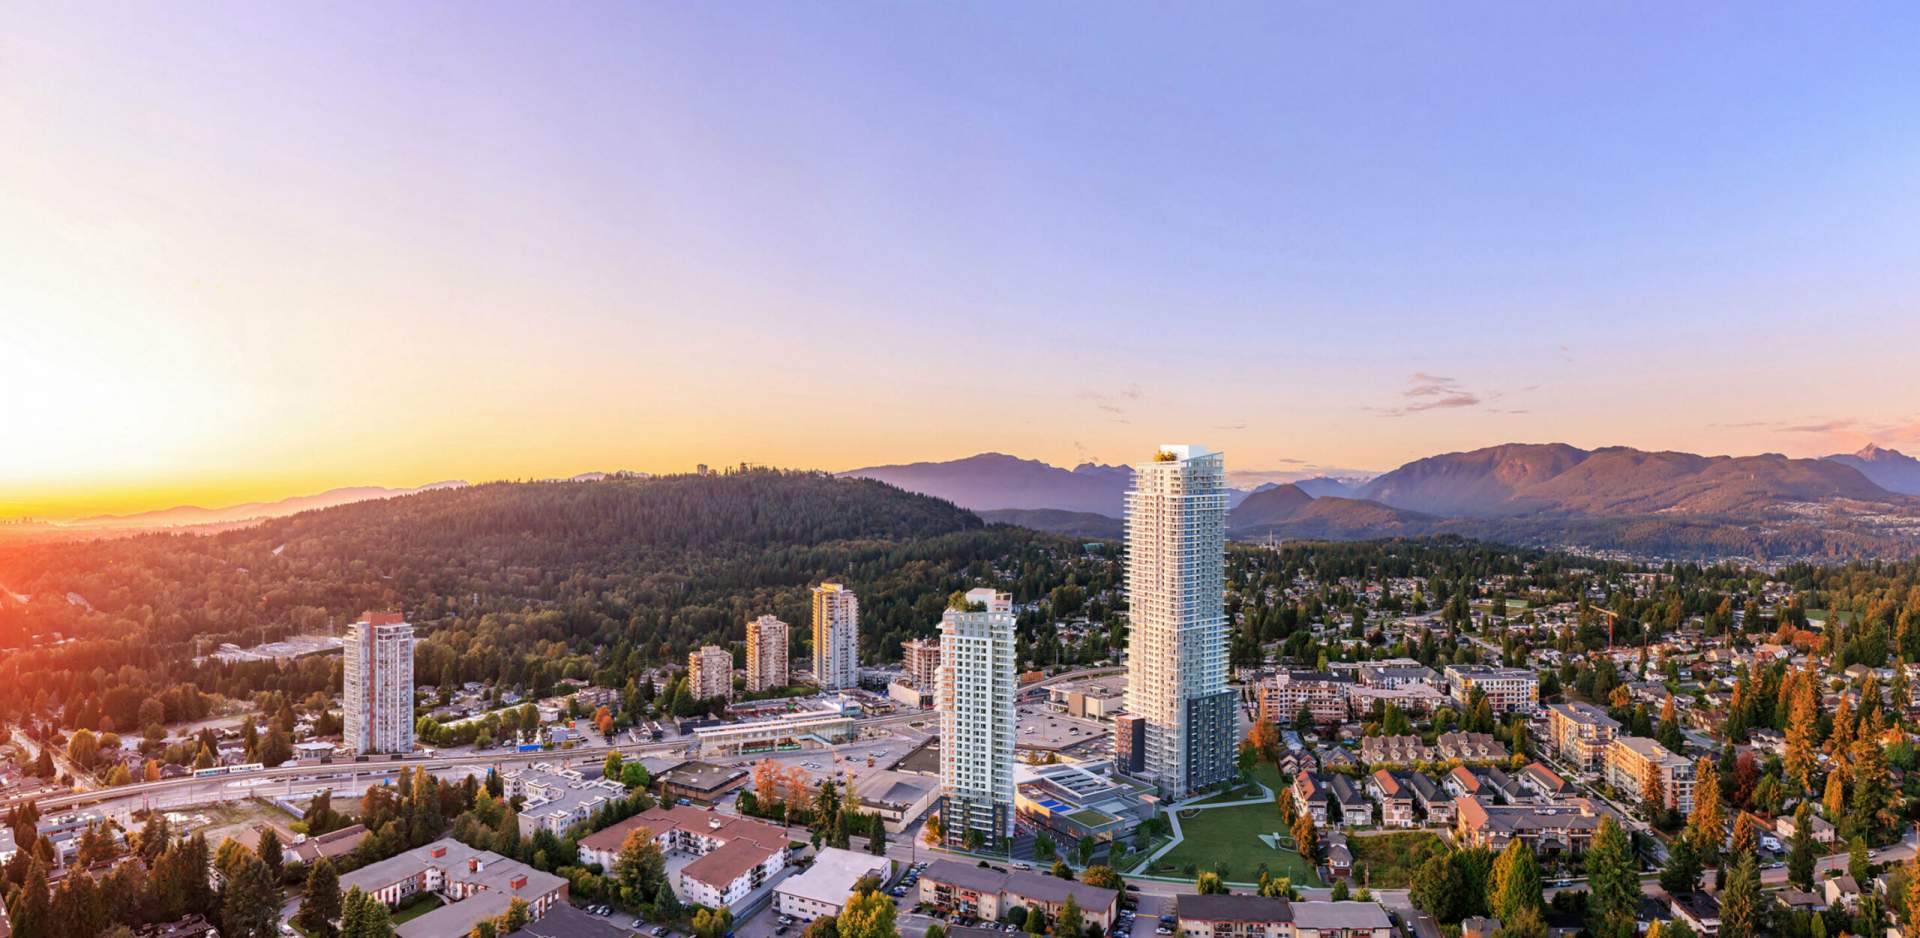 A 50-story condominium tower that's part of the Burquitlam Park mixed-use development.